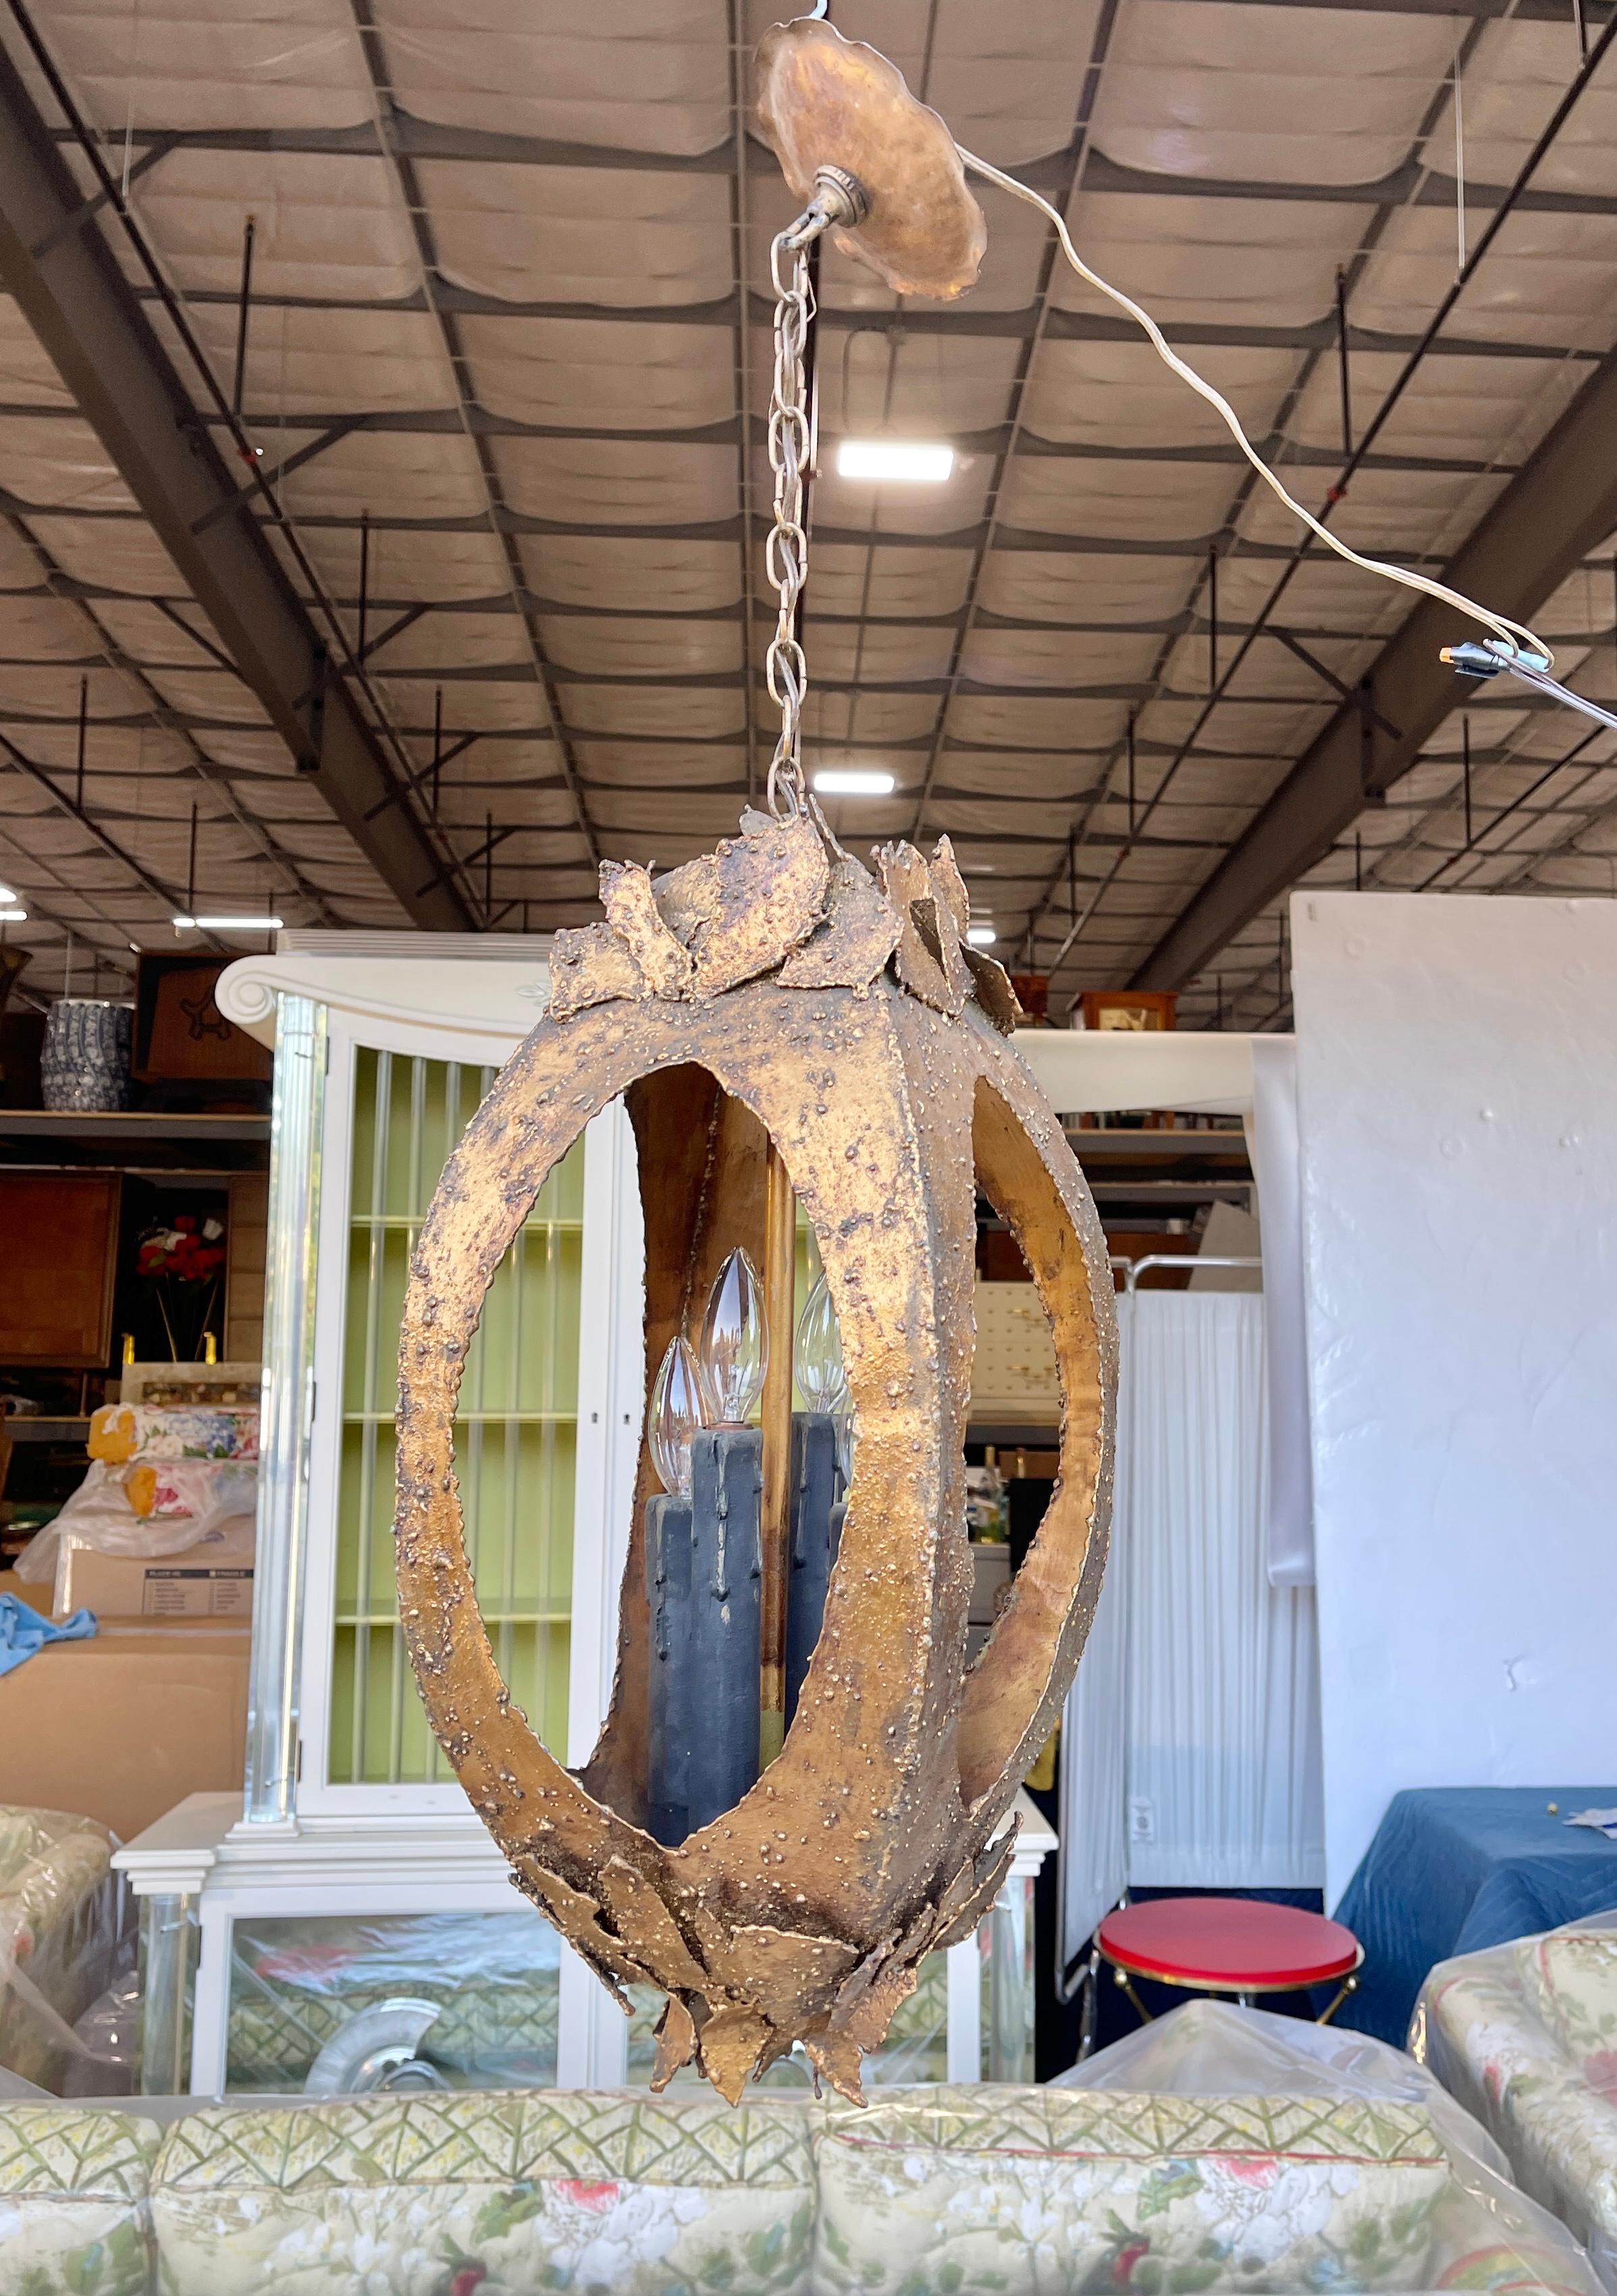 Designed by Thomas A. Greene for T. A. Greene Company and retailed by Feldman Lighting of Los Angeles.
Pendant itself is 24 inches high by 10 inches diameter. With existing chain the drop is 30 inches.
If requested we can change the color of the